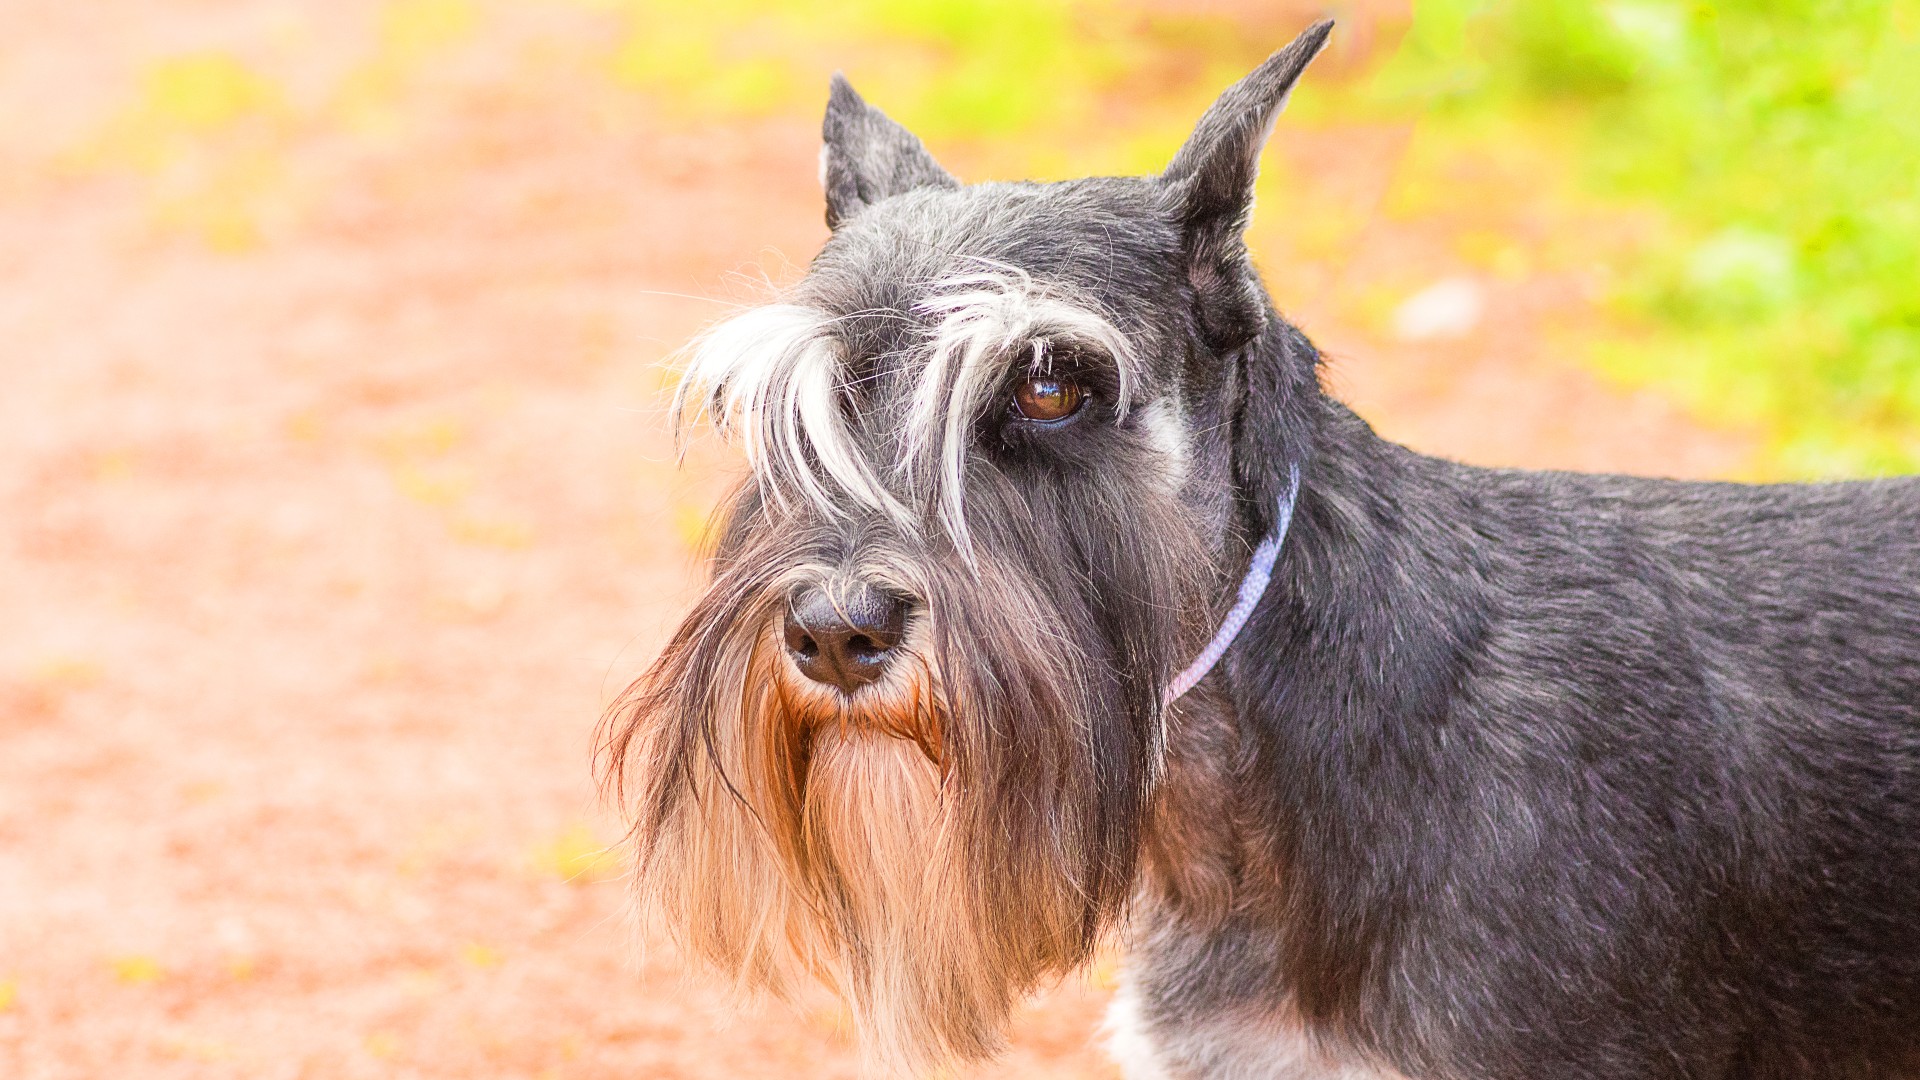 10 wiry hair dog breeds and how to care for their coats | PetsRadar